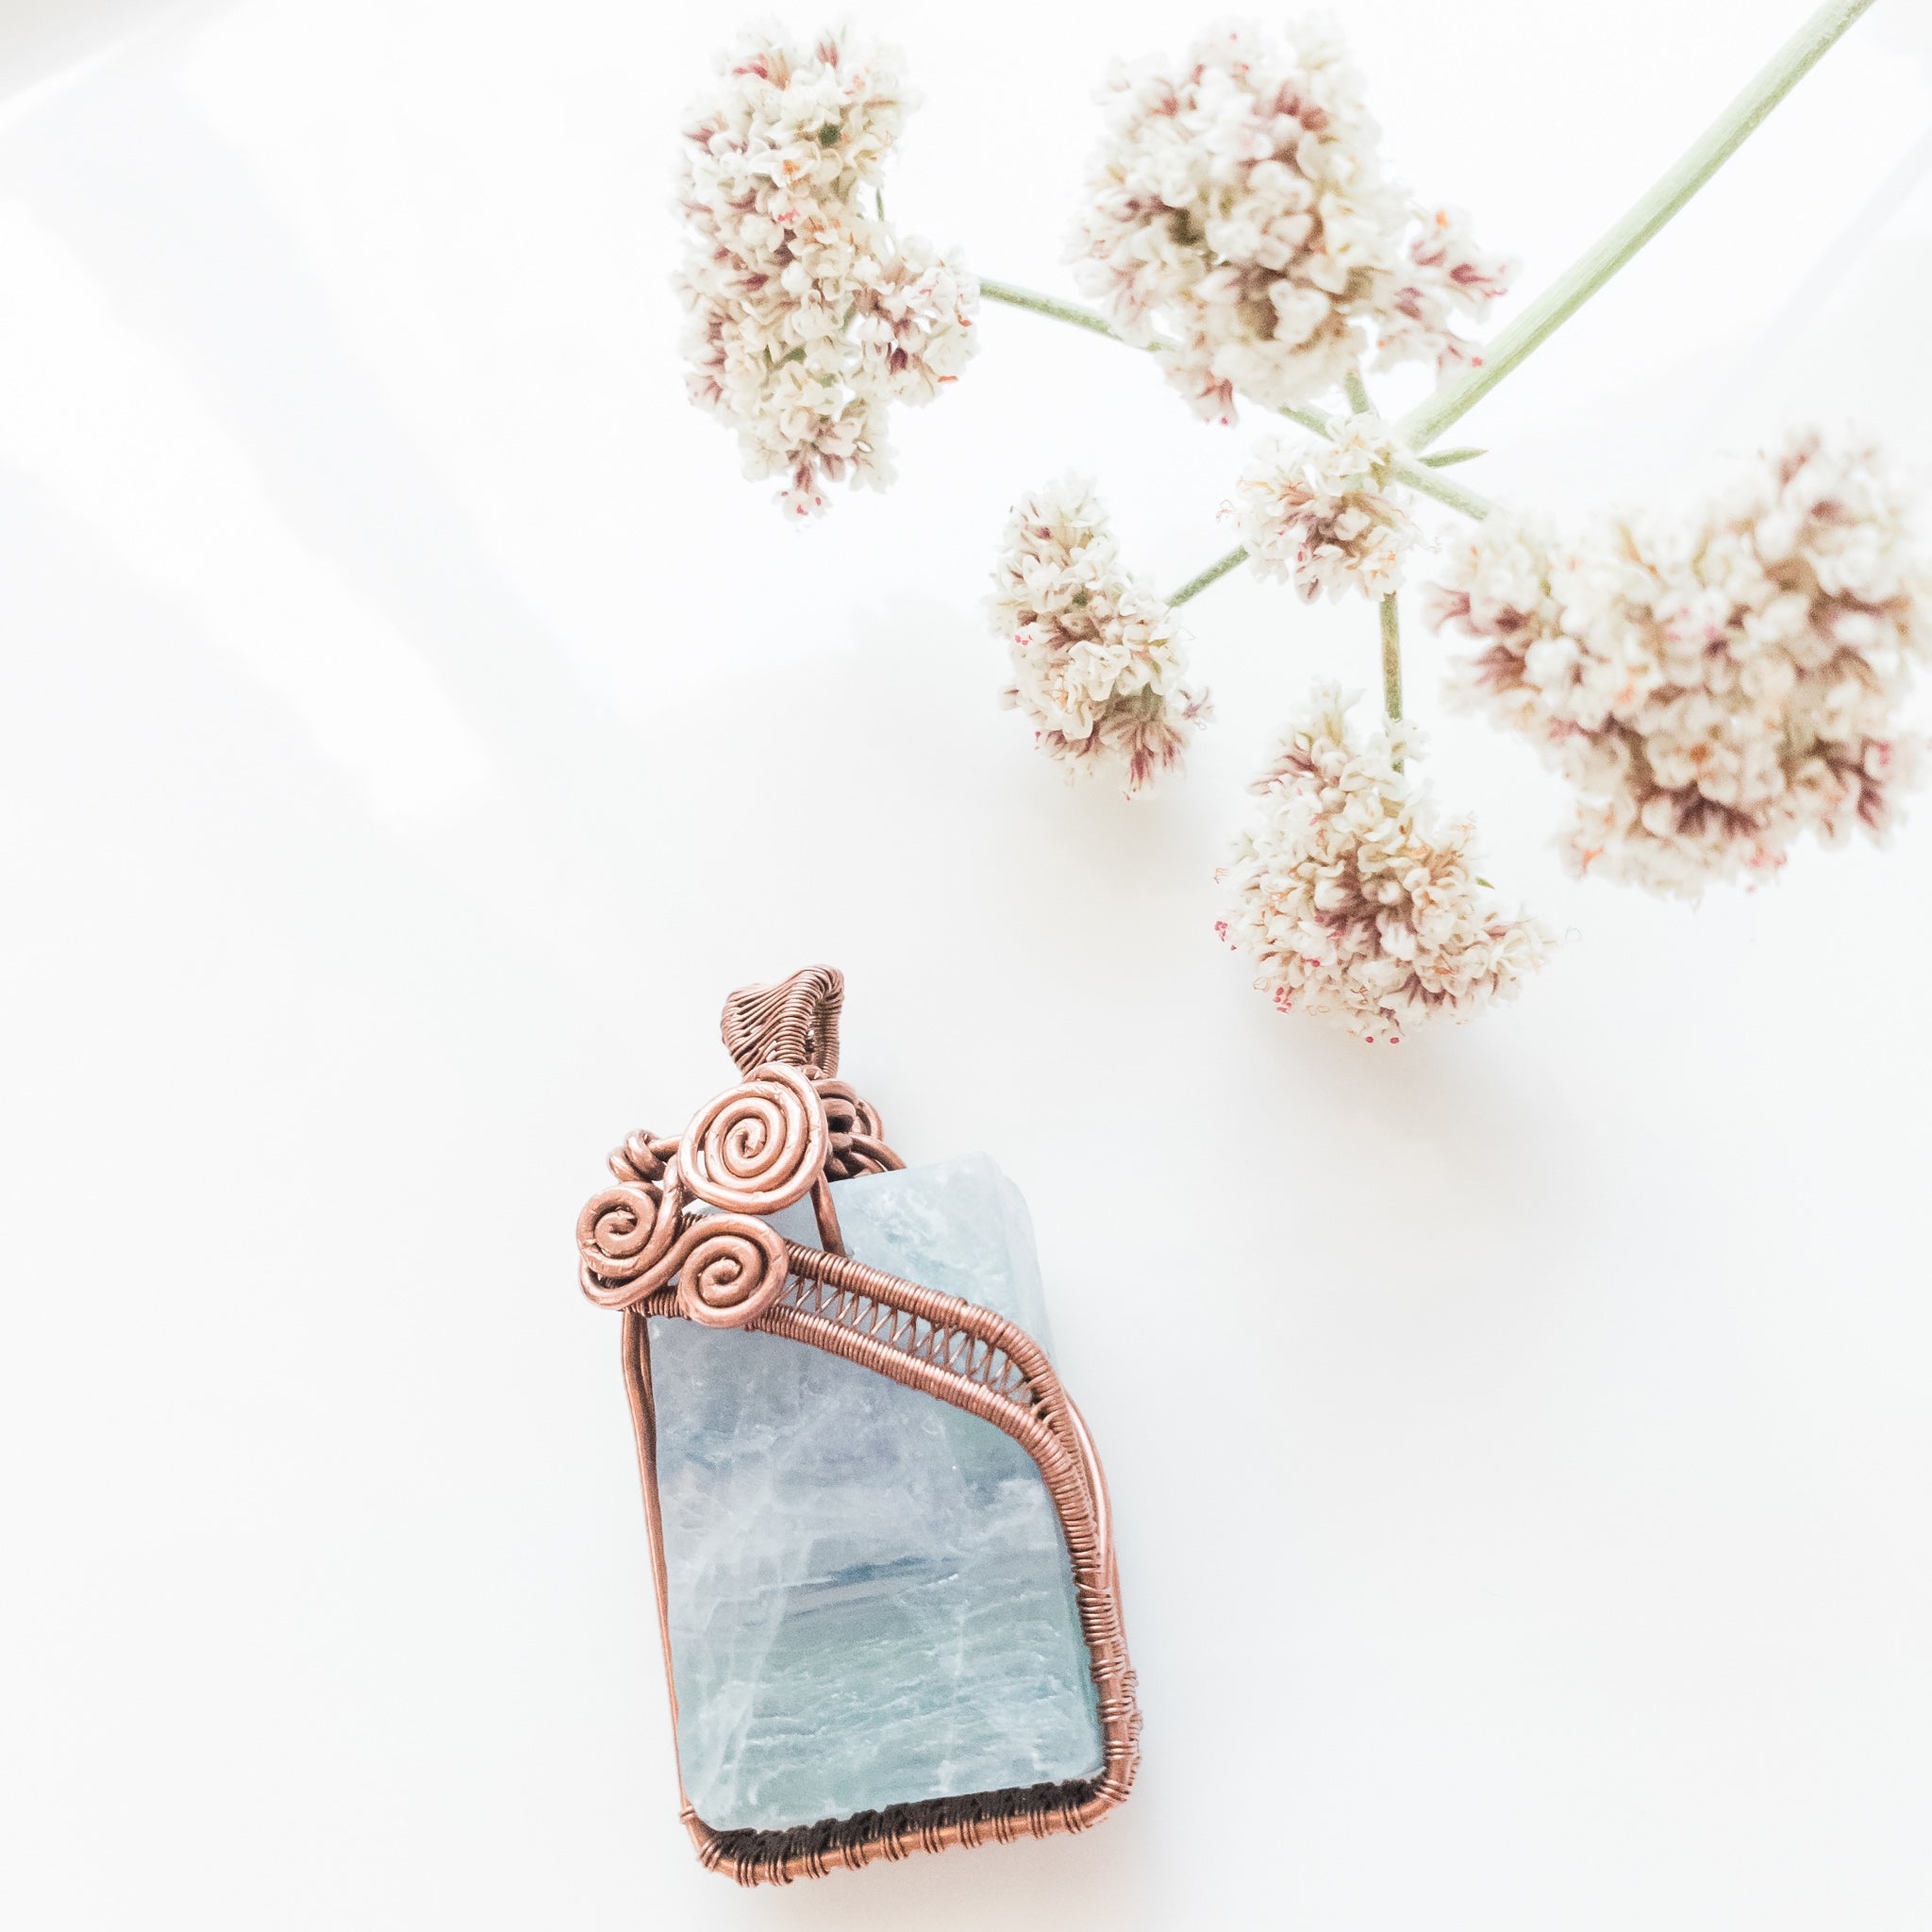 Laguna Collection - Beautiful Blue & Green Fluorite Pendant in Copper - One-of-a-Kind - Front View - BellaChel Jeweler